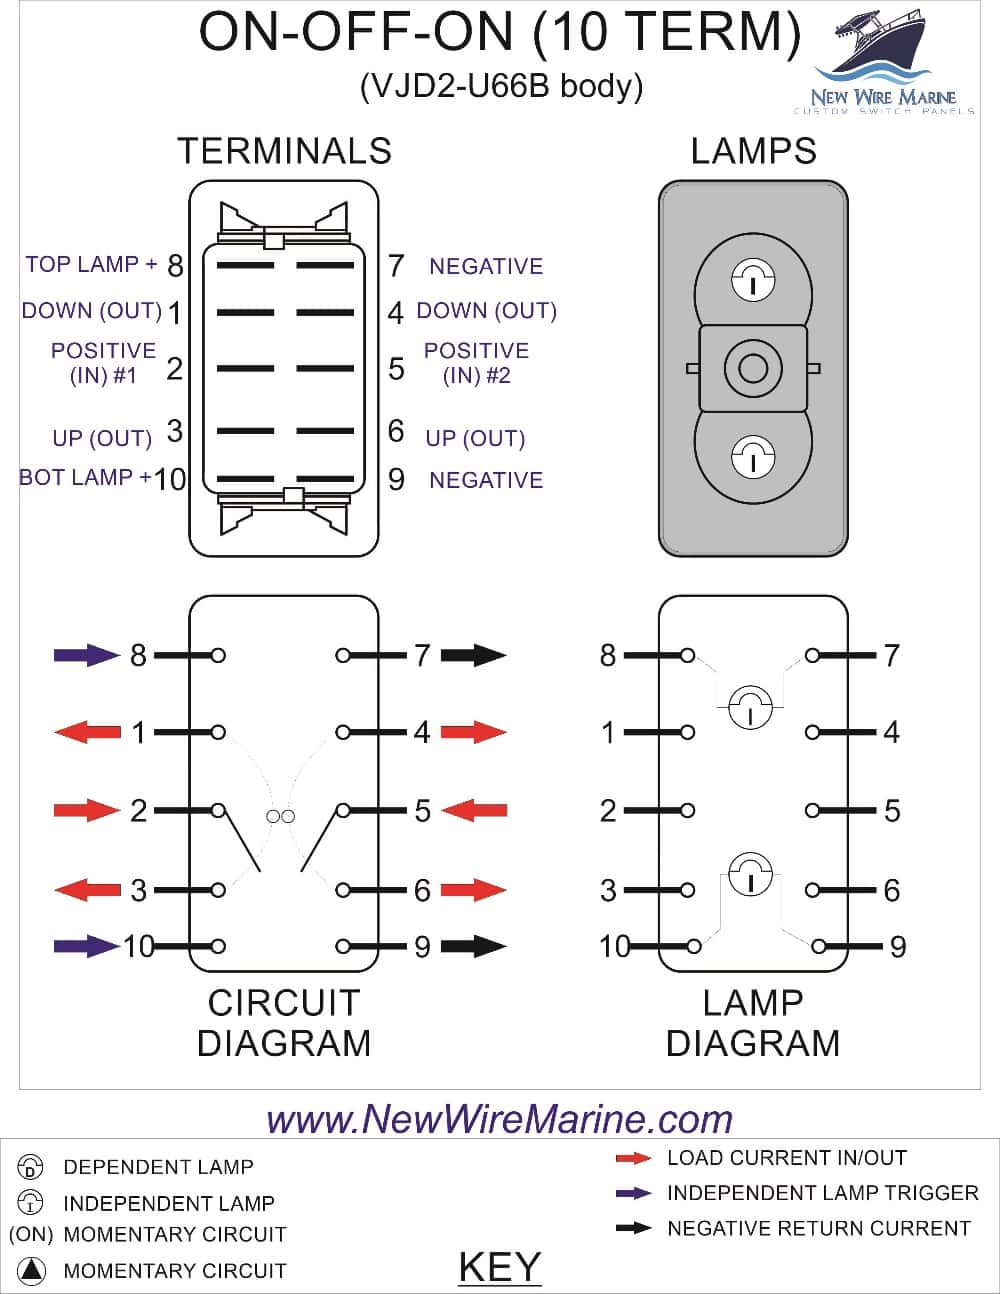 Momentary Push Button Wiring Diagrams Pull | Manual E-Books - Push Button Switch Wiring Diagram